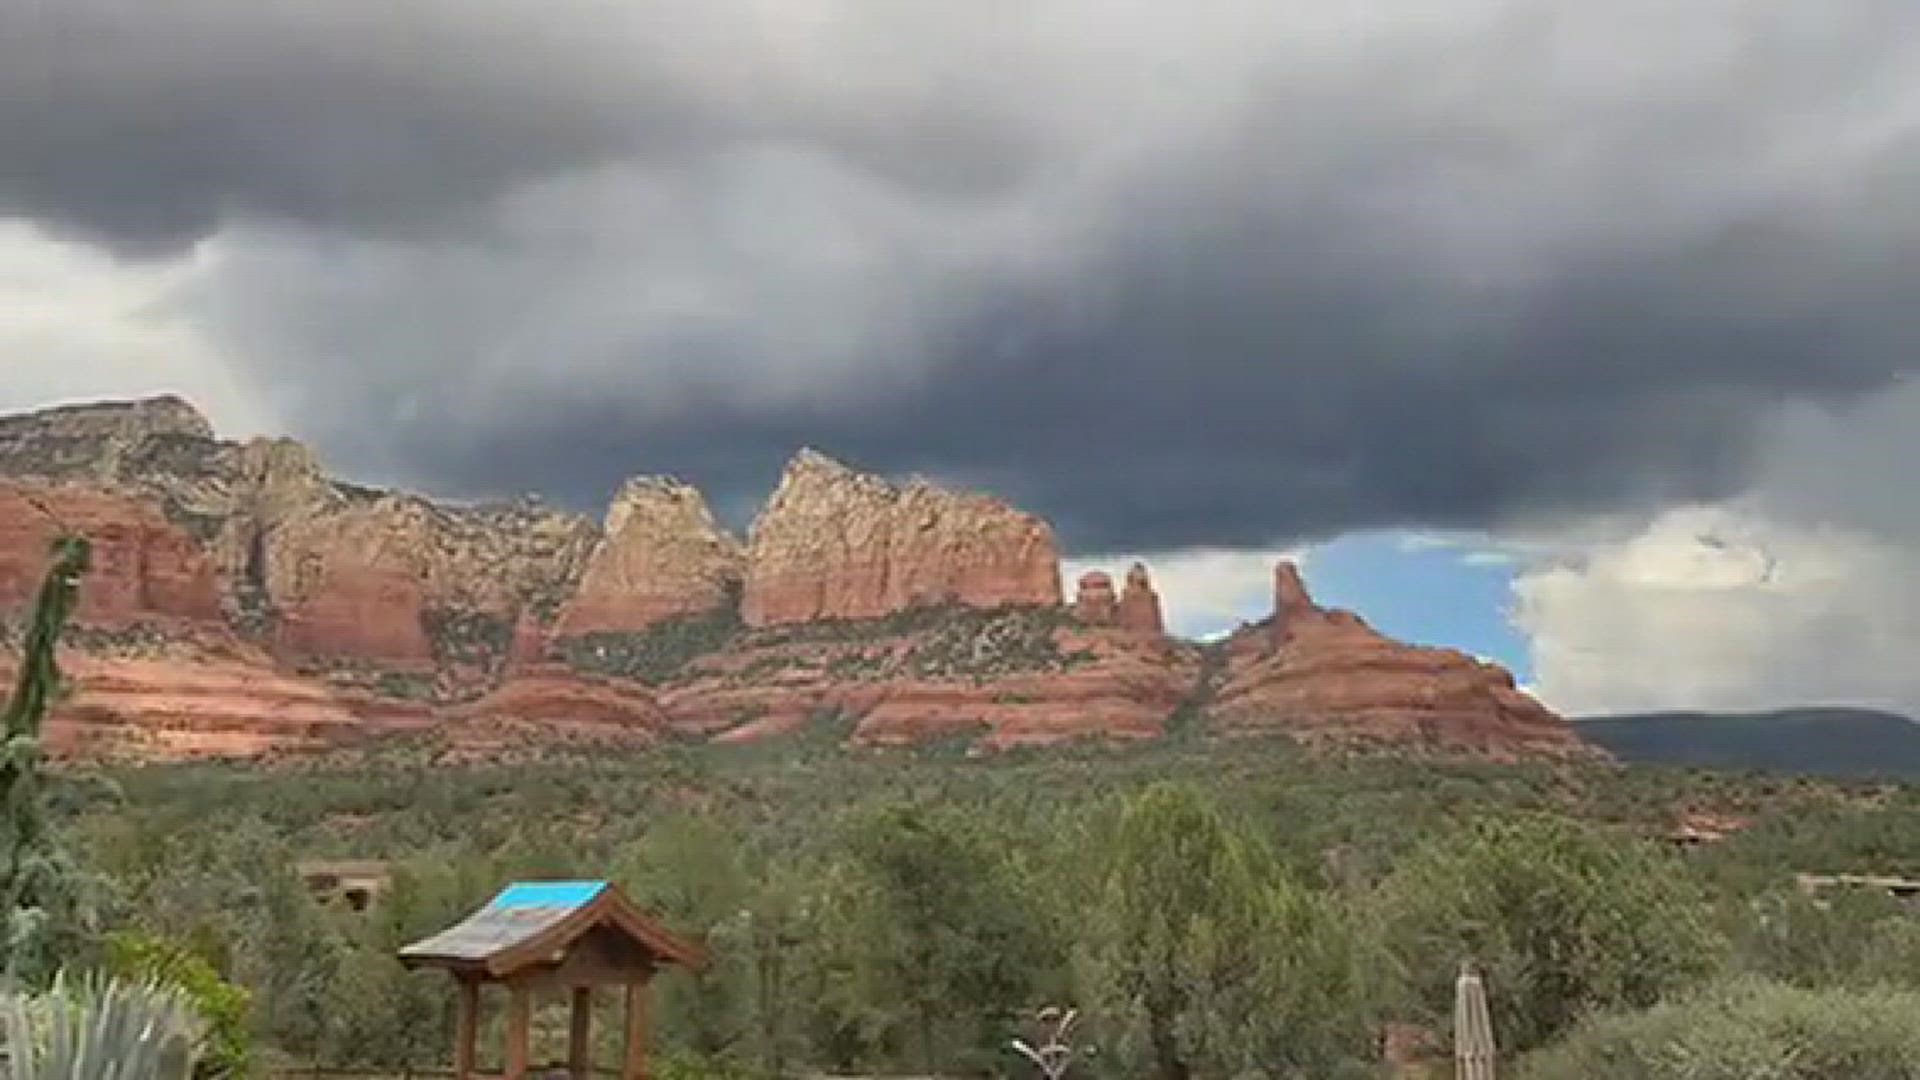 Awesome time-lapse video of the Sedona rain Friday, July 29, 2022.
Credit: Dr Dan